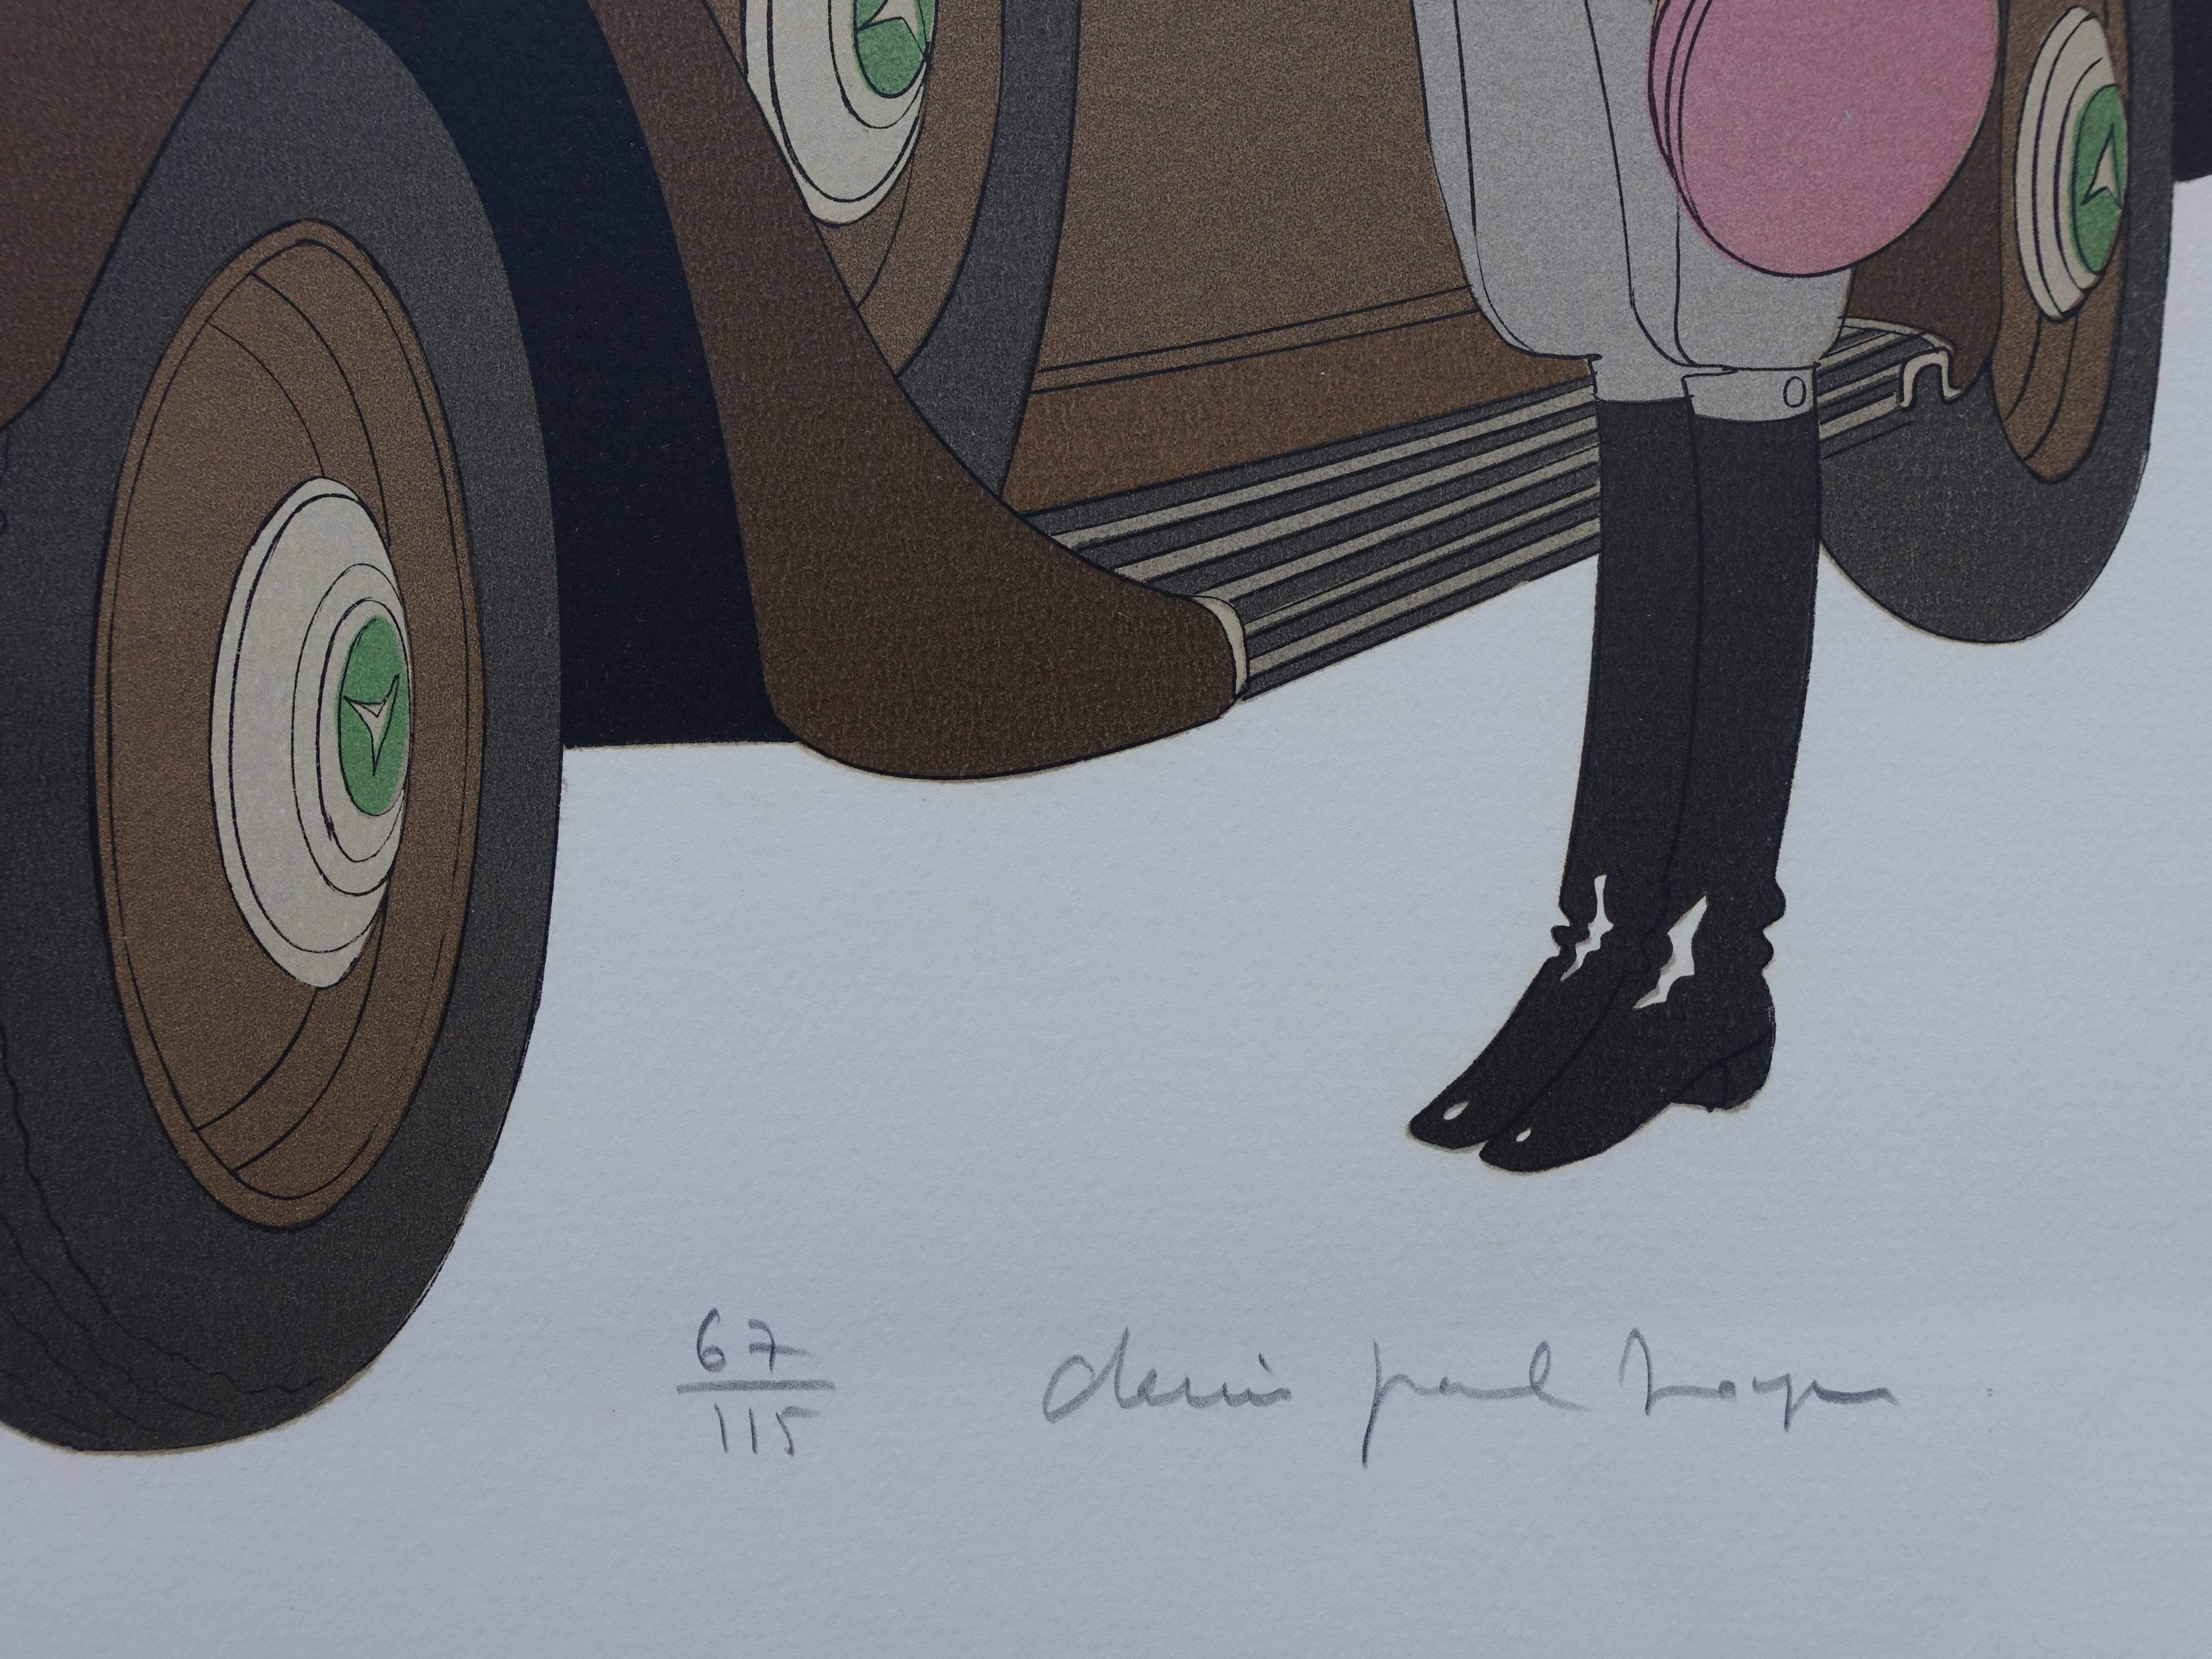 Hotel: Mercedes Cabriolet T290 & Palais Mediterranee - Signed lithograph - 115ex - Print by Denis Paul Noyer